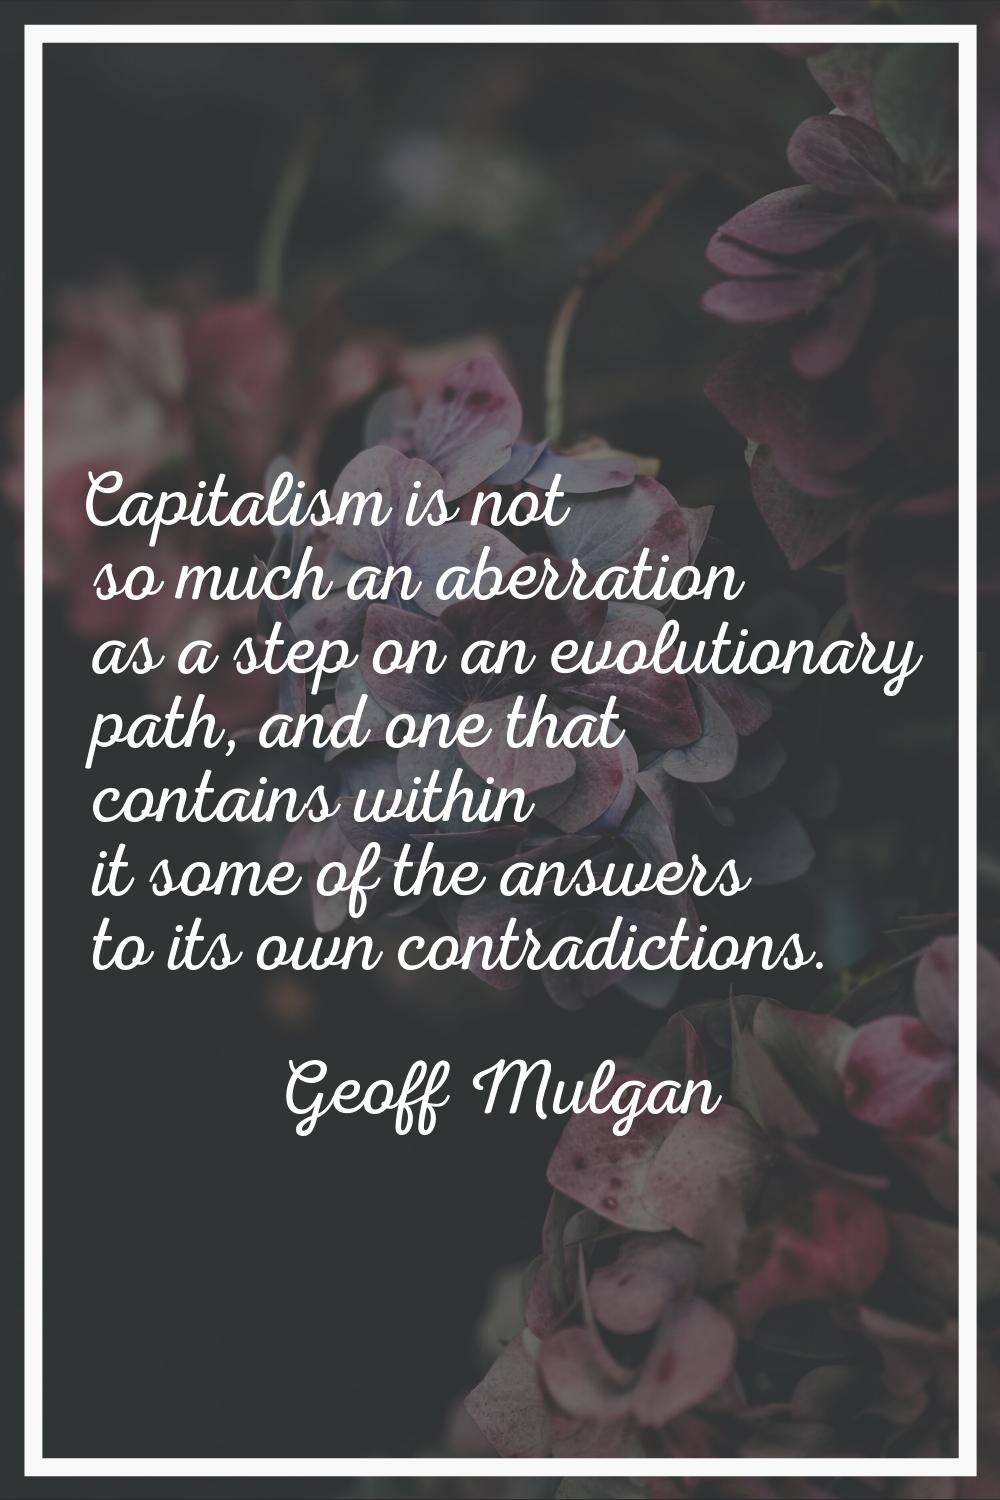 Capitalism is not so much an aberration as a step on an evolutionary path, and one that contains wi